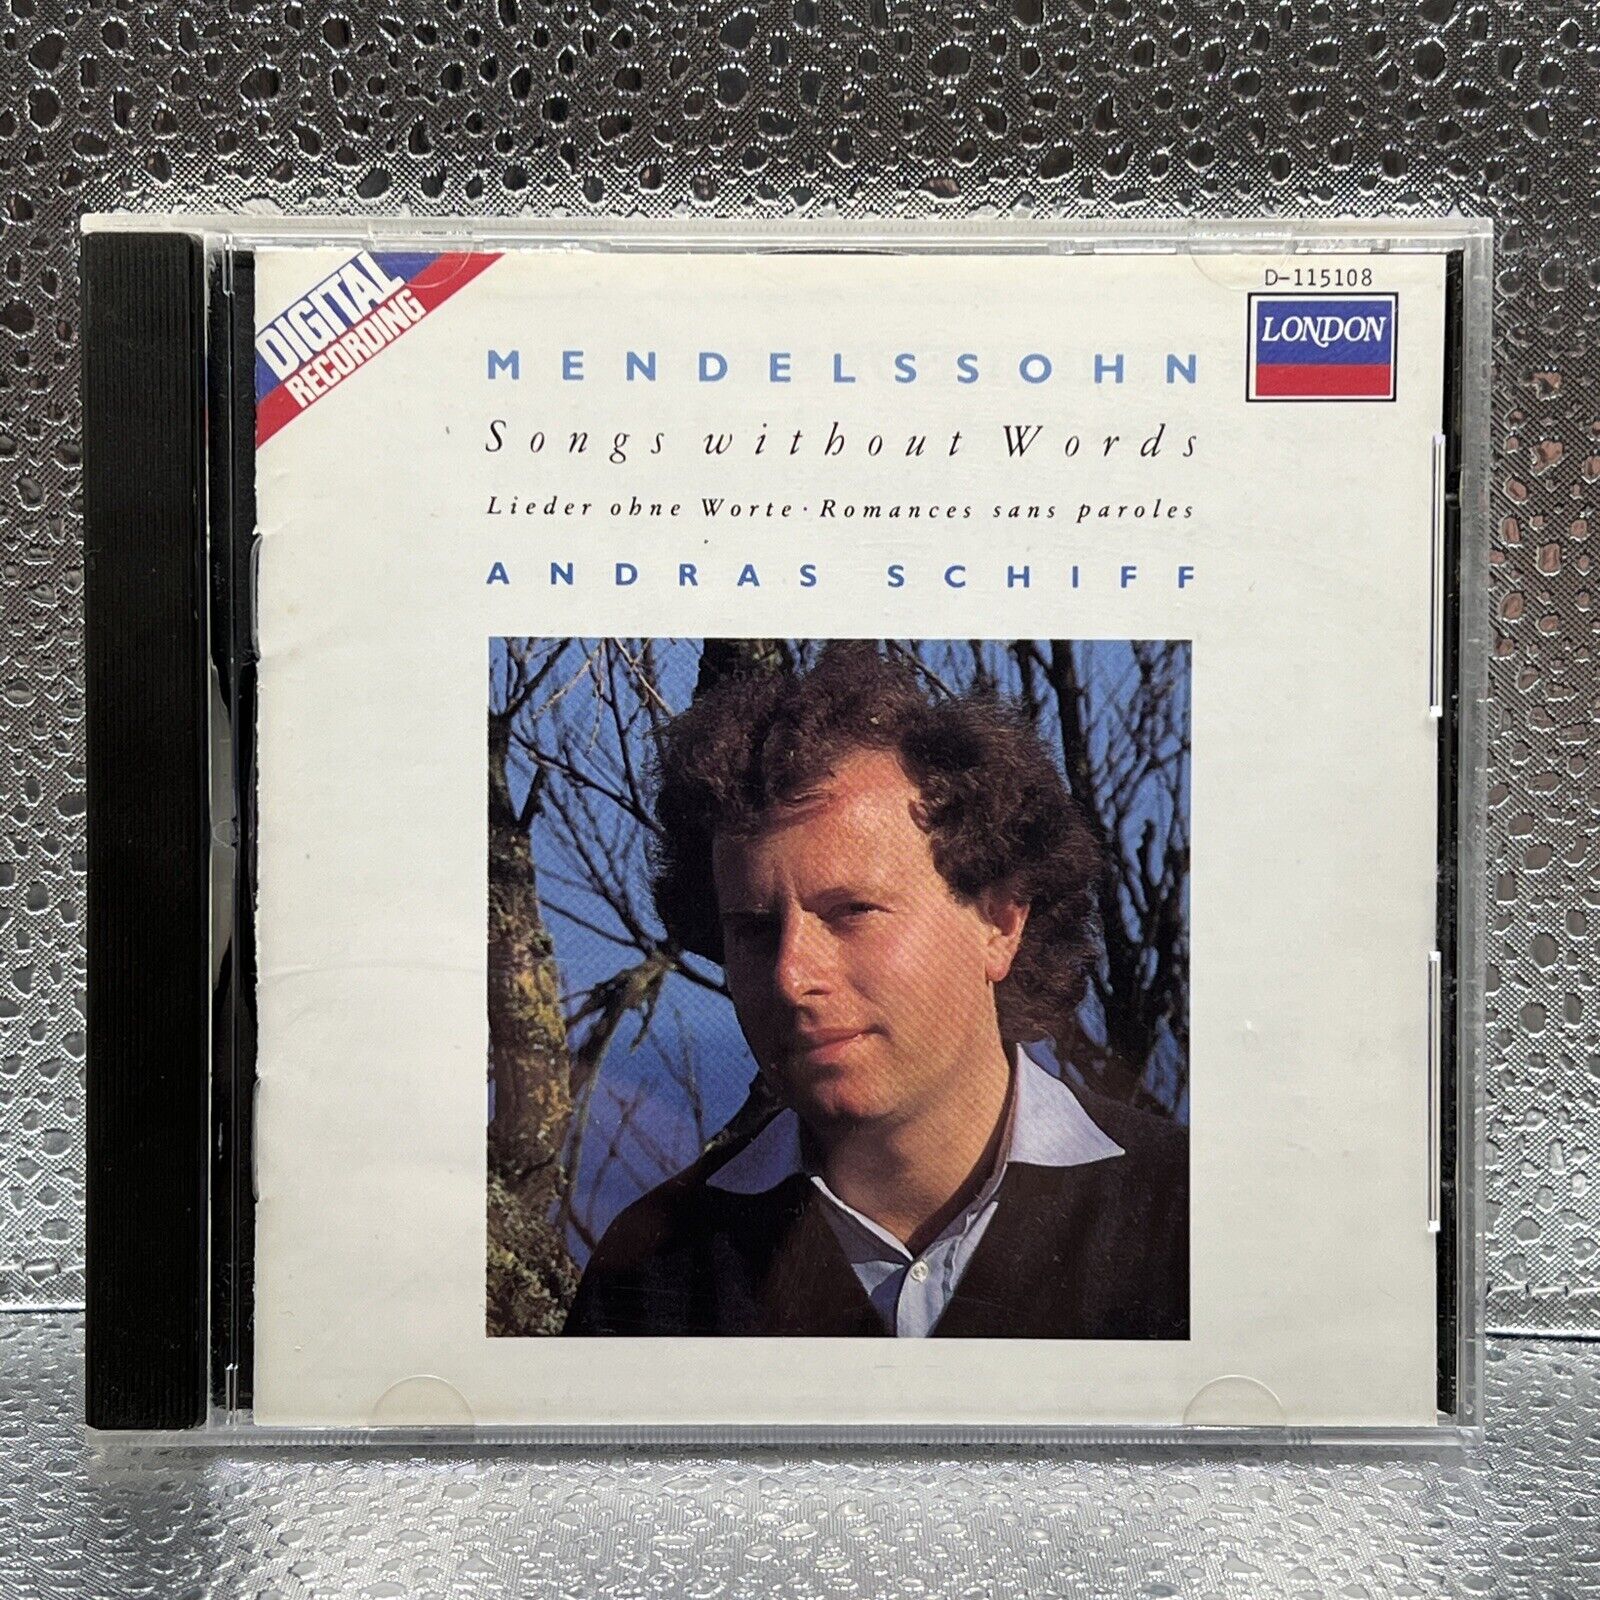 Mendelssohn: Songs without Words (Classical CD) Andras Schiff LONDON 115108